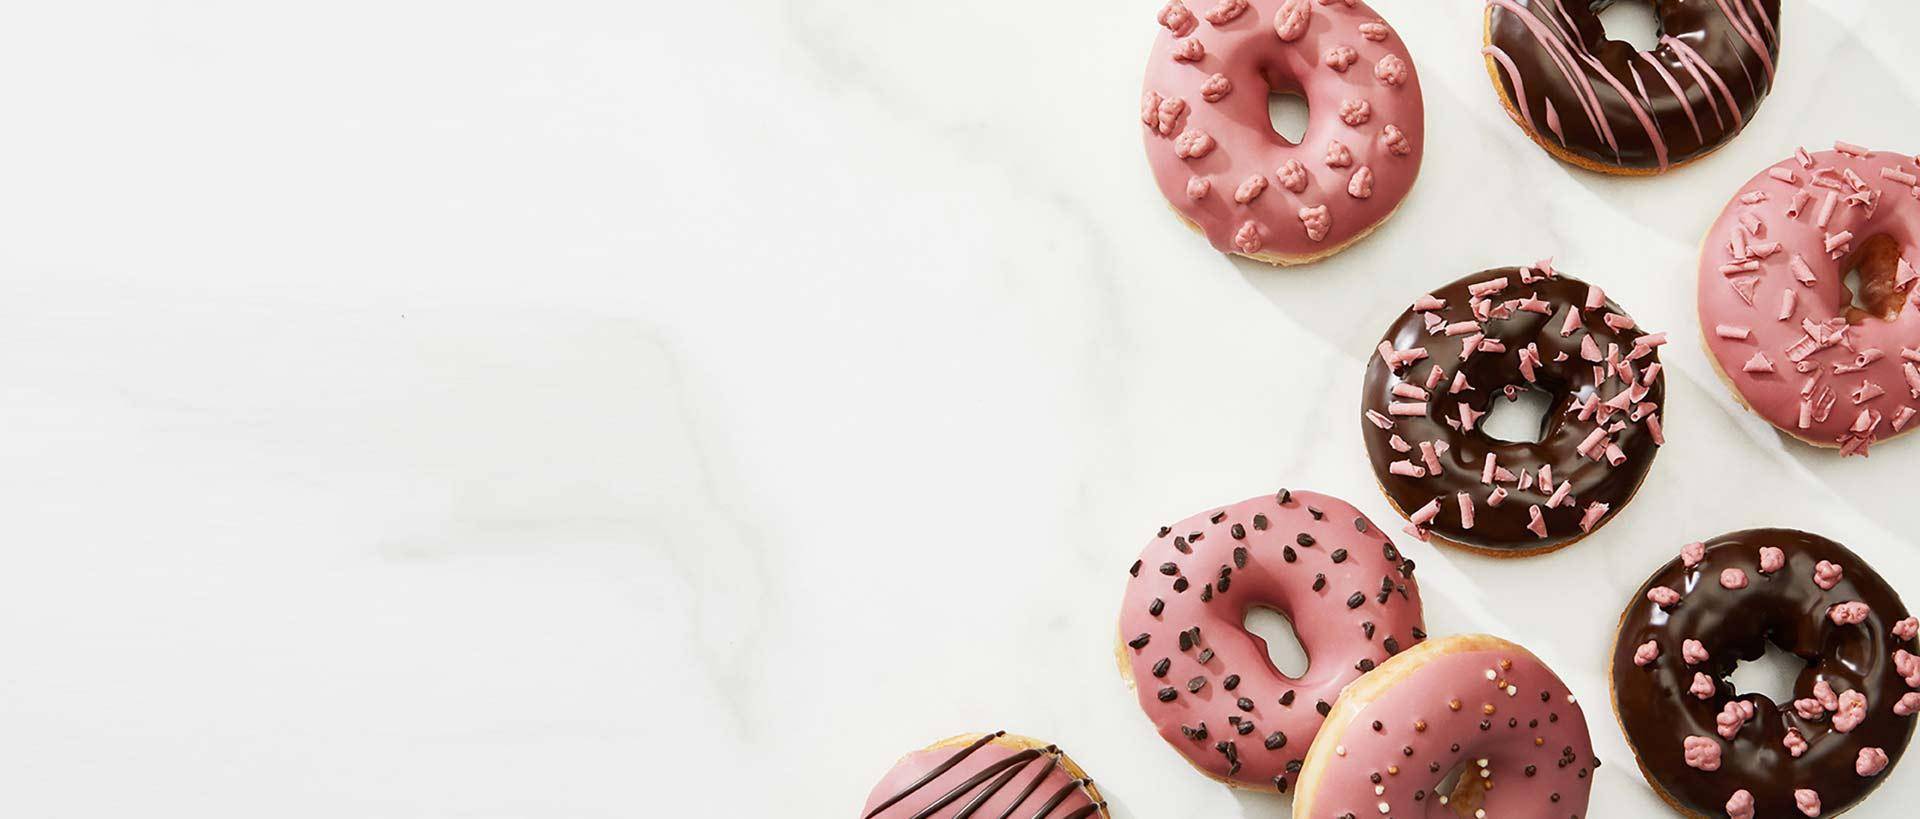 Download Ruby Chocolate Doughnuts